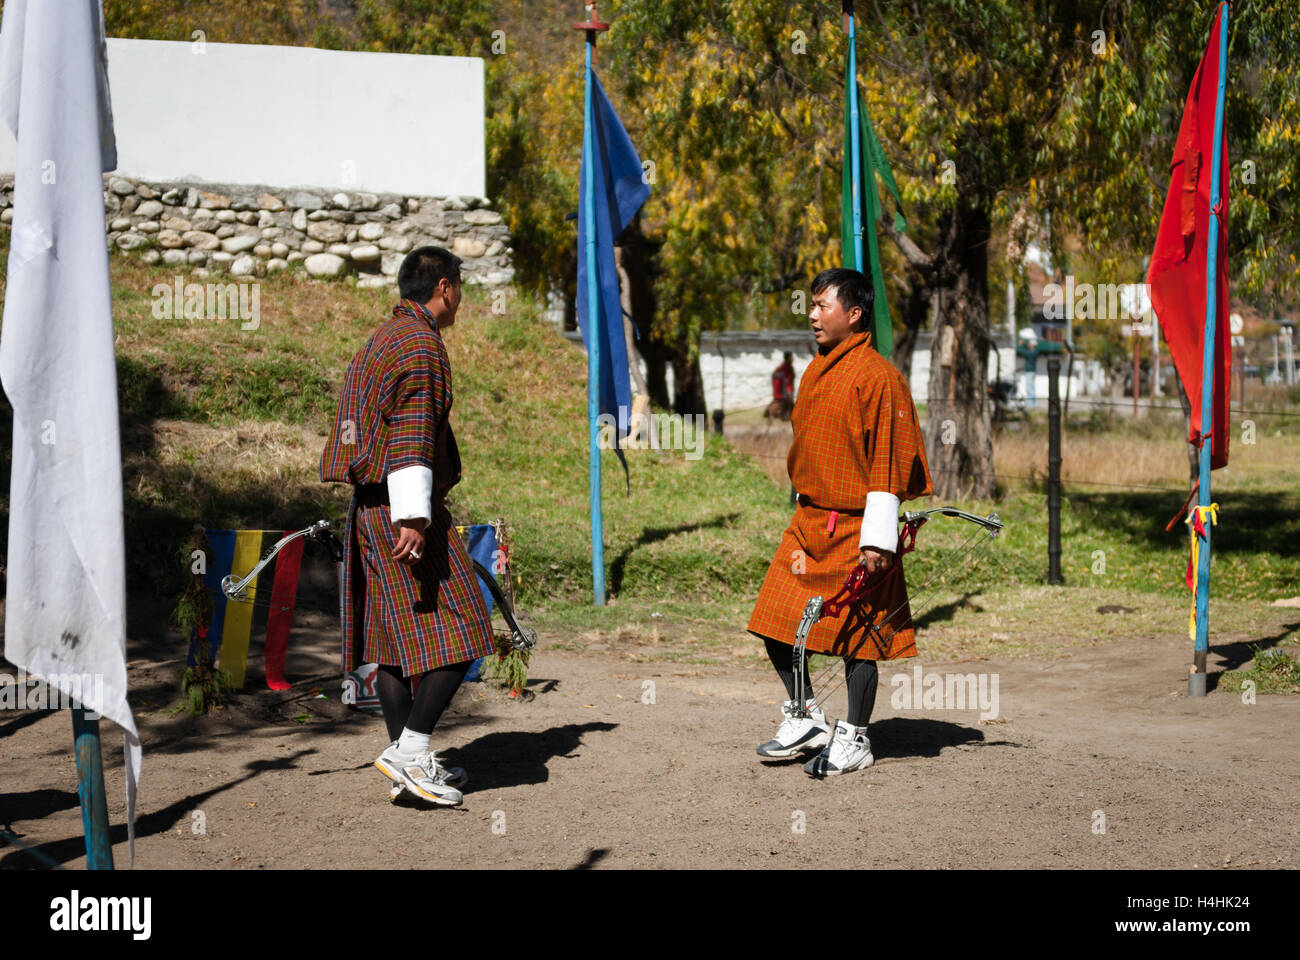 Opponents face each other before a round in a traditional archery match in Paro, Bhutan Stock Photo